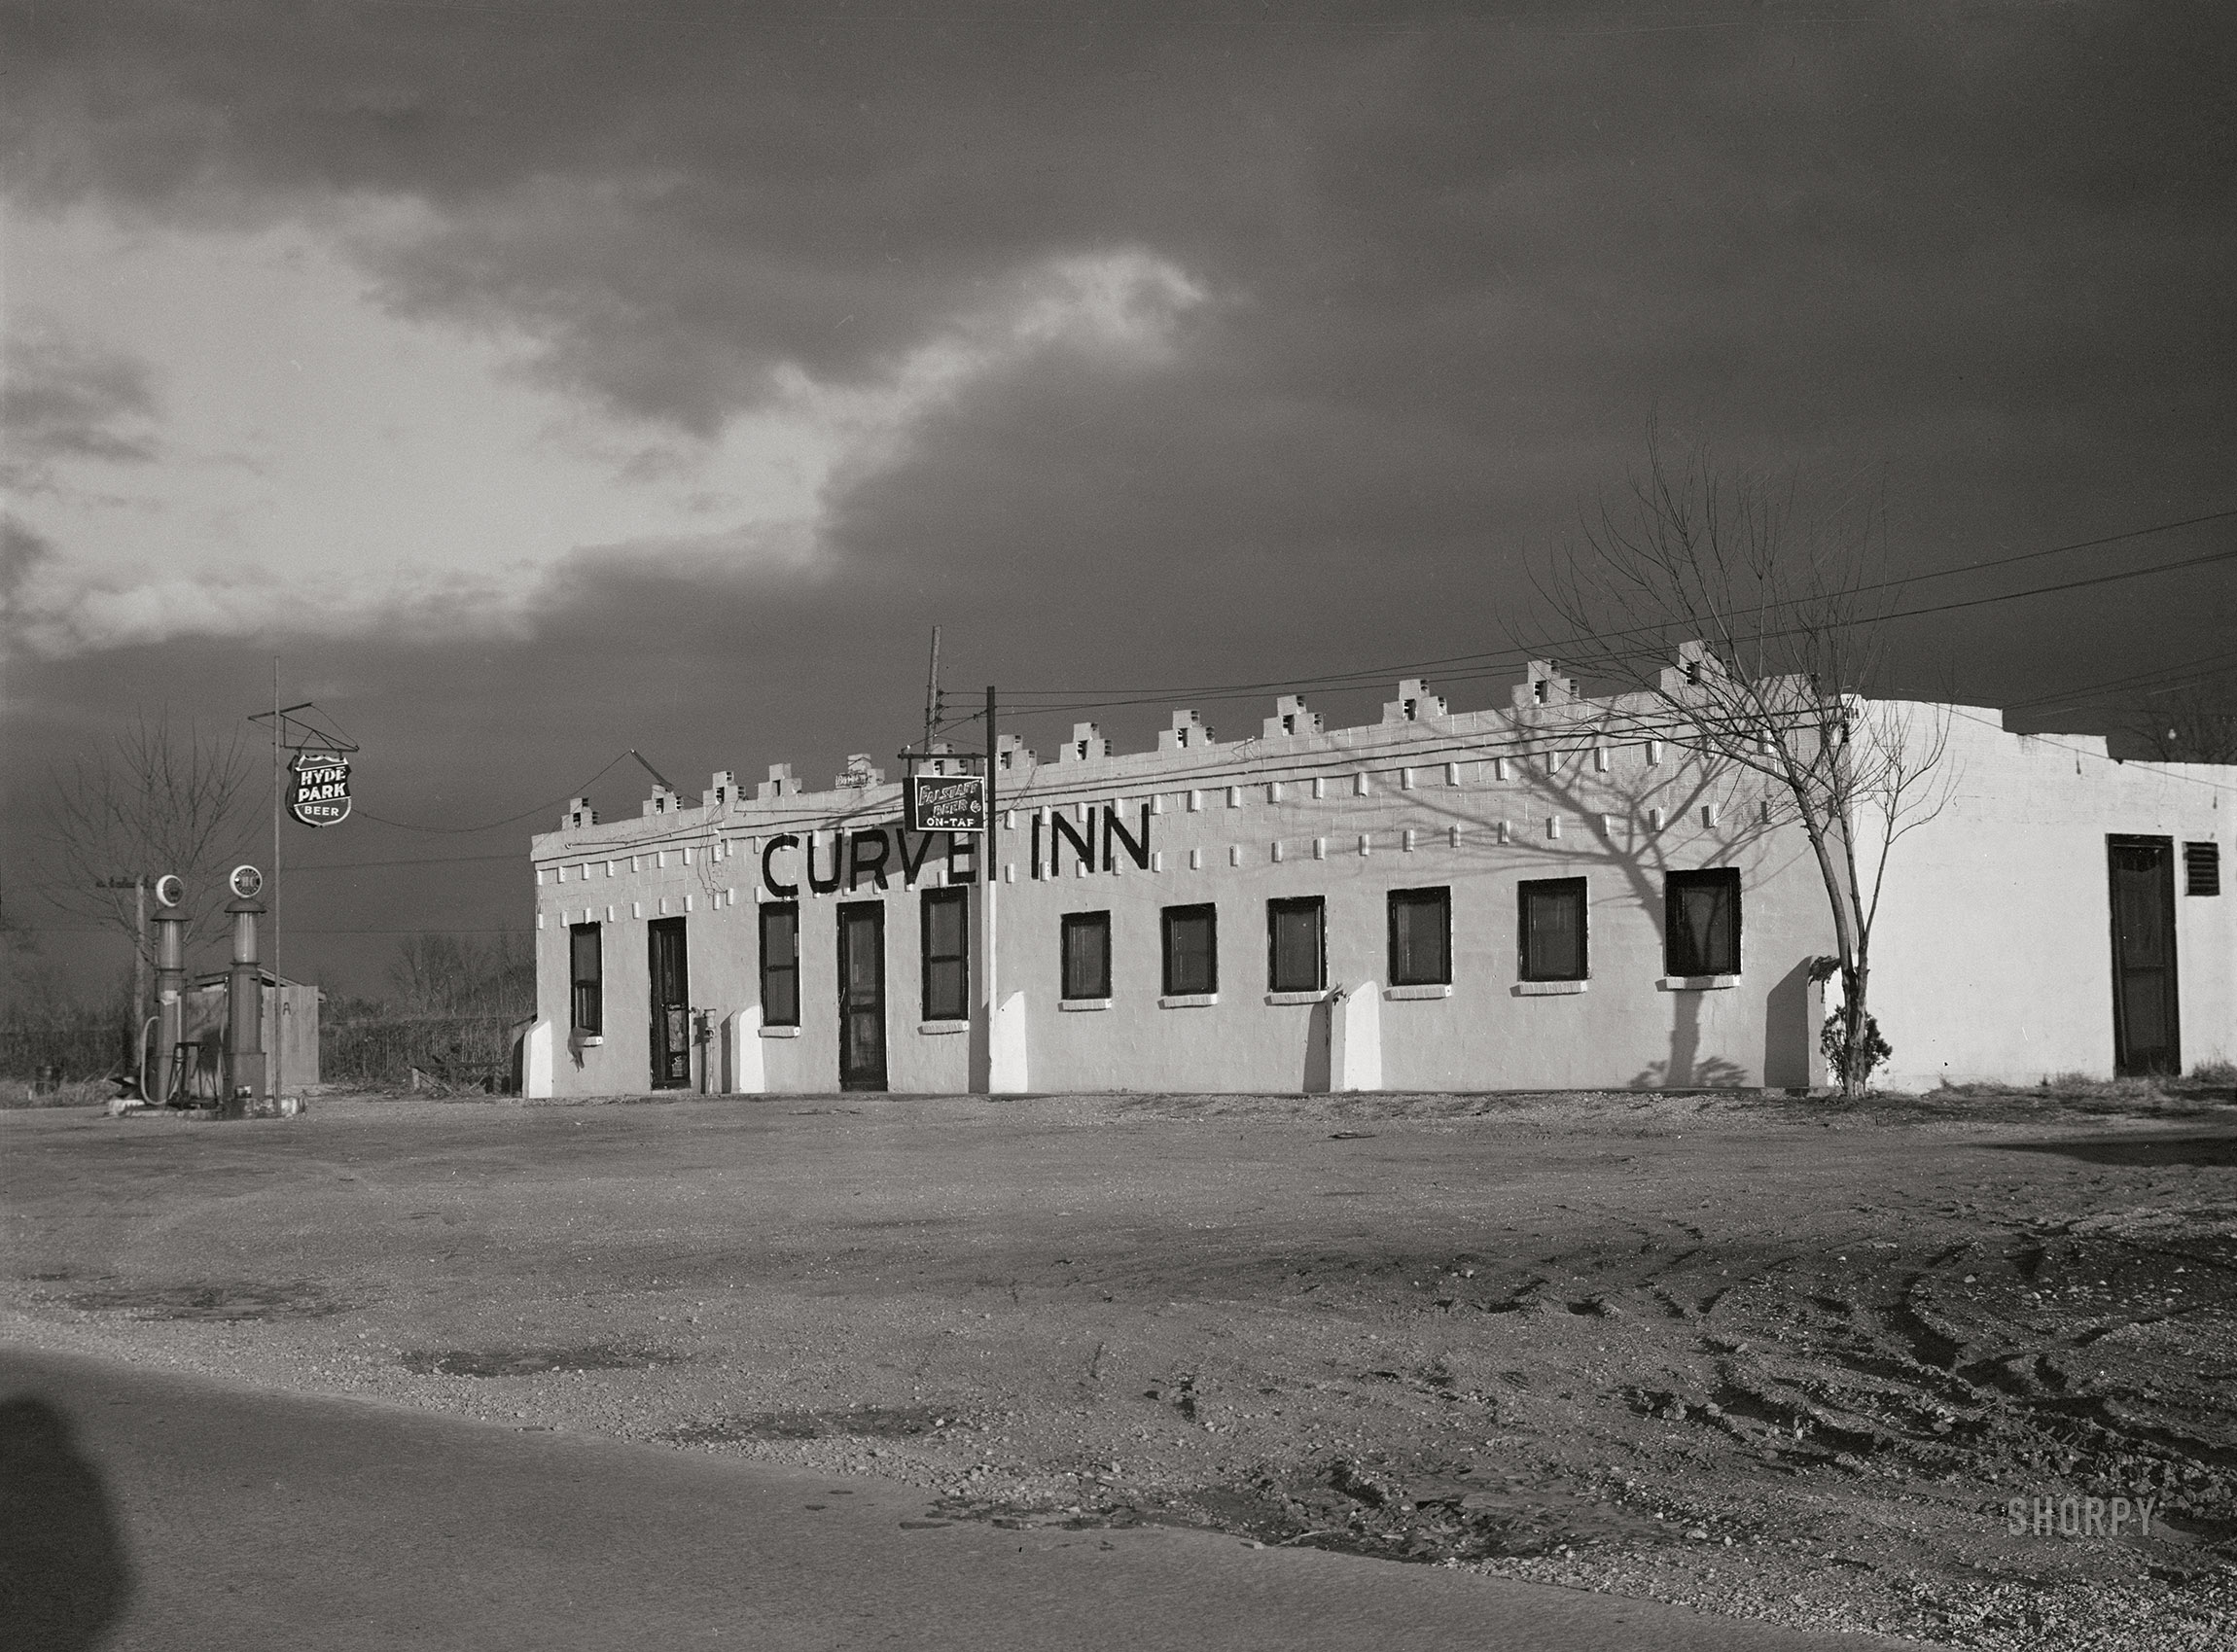 February 1942. "Union County, Missouri. Roadhouse." Fill 'er up with Hyde Park! Medium format acetate negative by John Vachon for the Office of War Information. View full size.